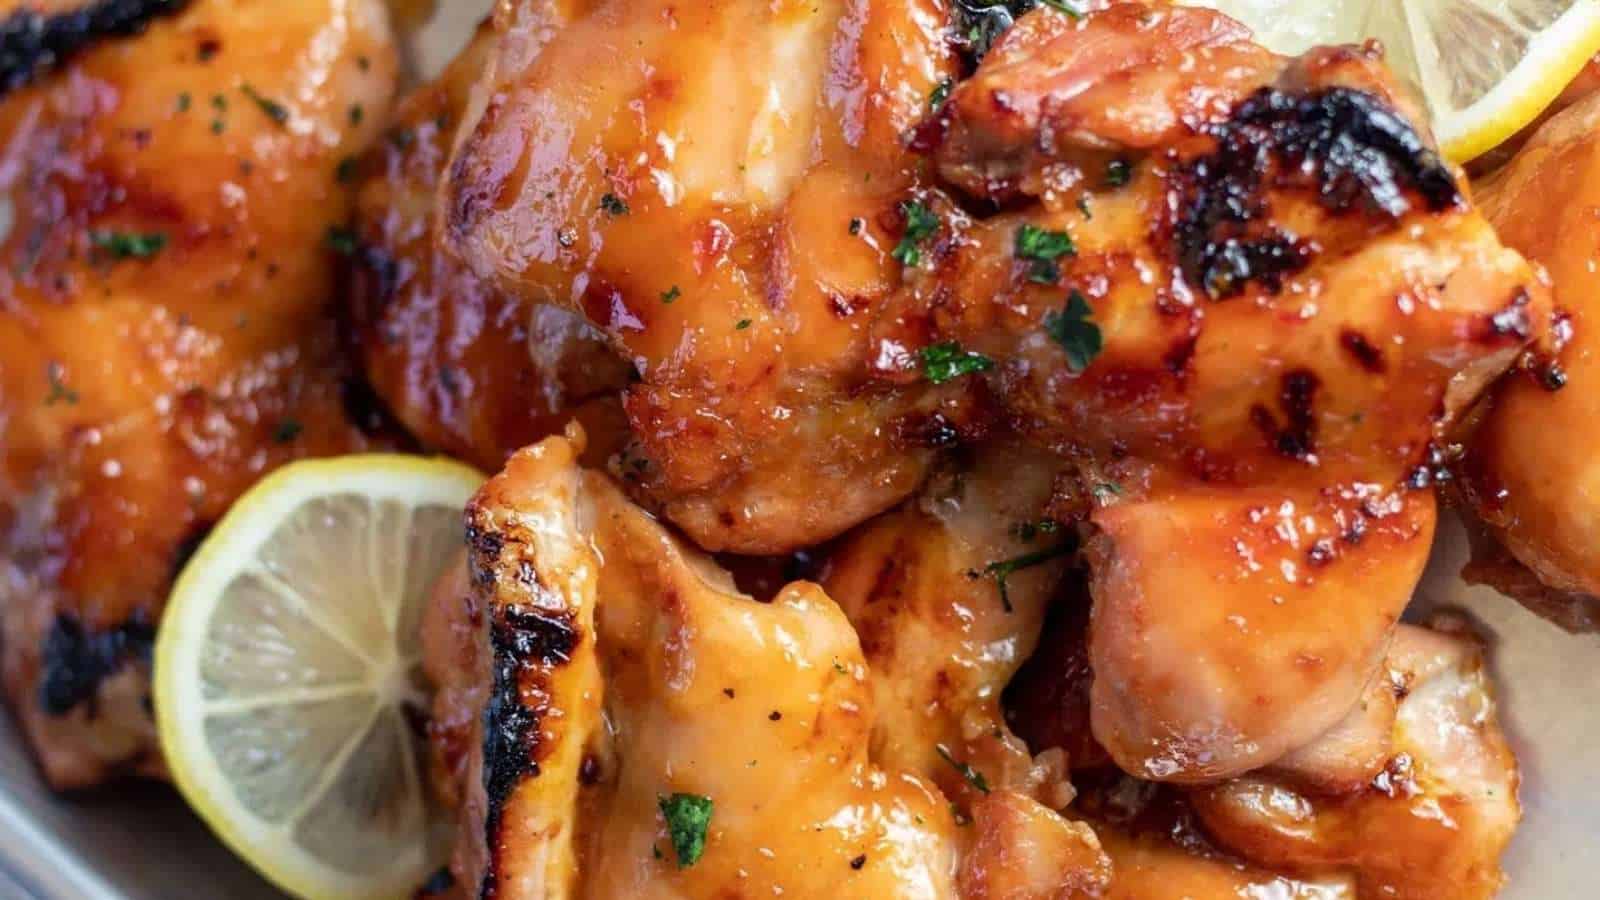 Grilled chicken wings with lemon wedges on a plate.